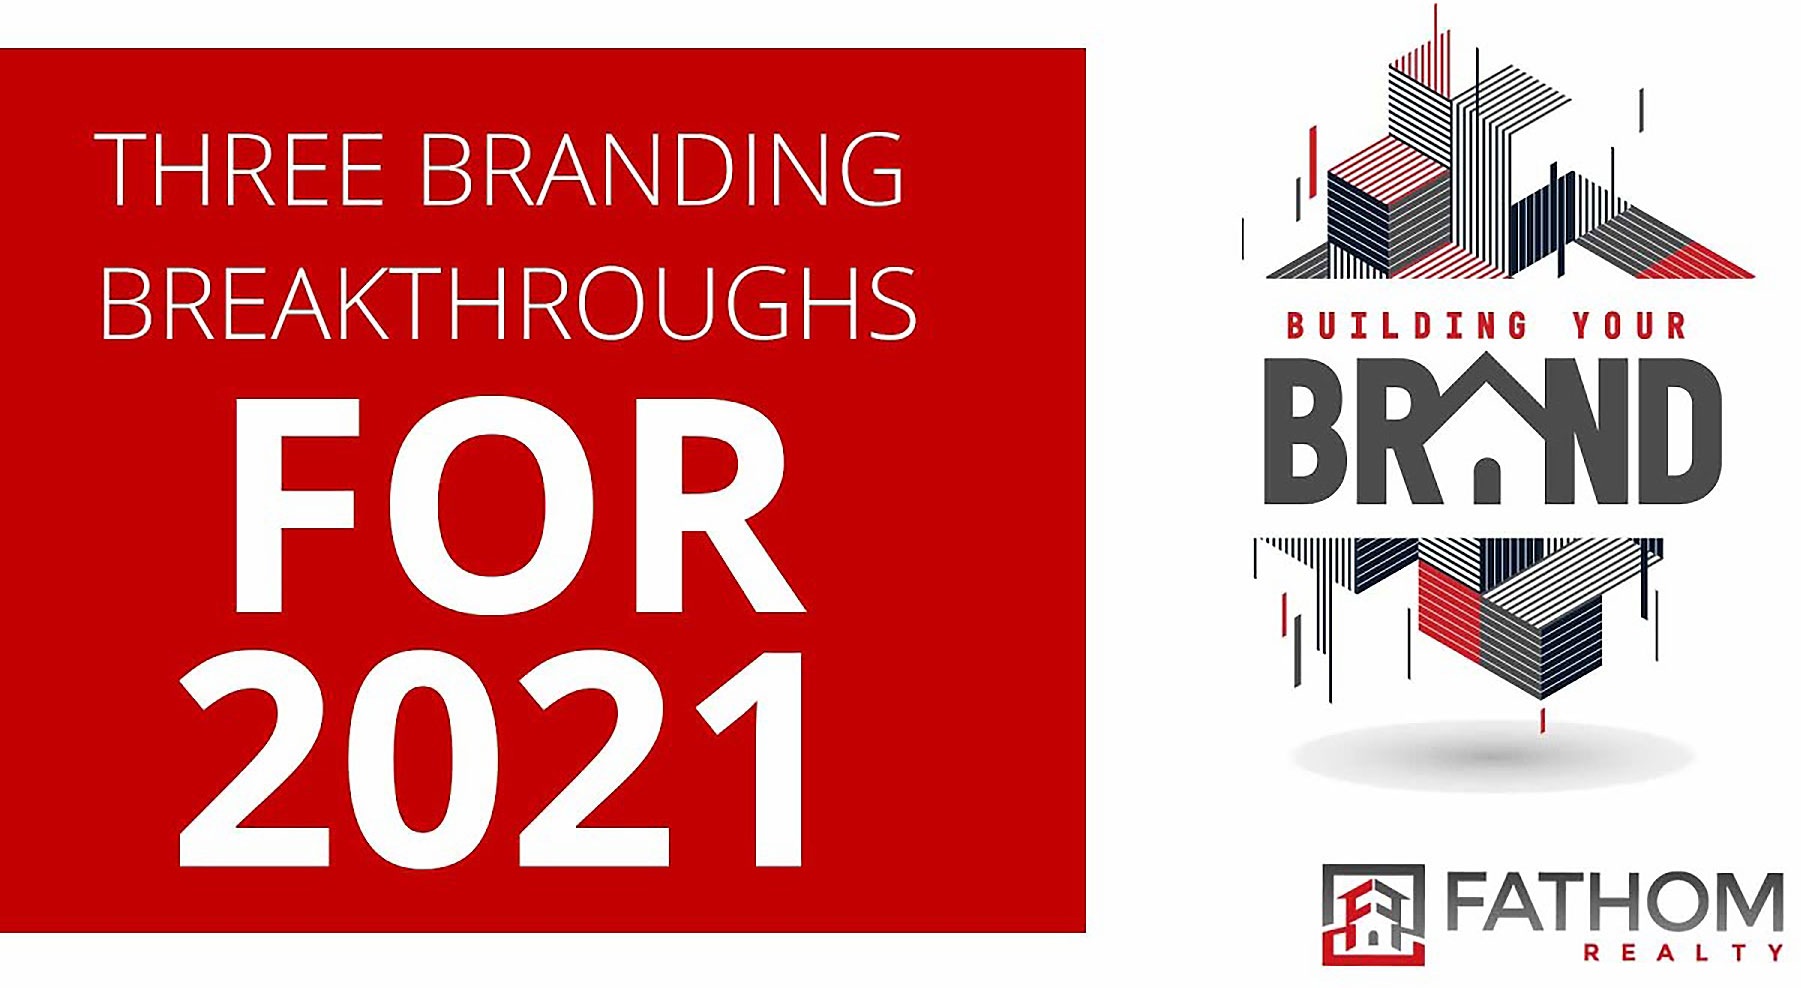 Featured image for “Three Branding Breakthroughs for 2021”